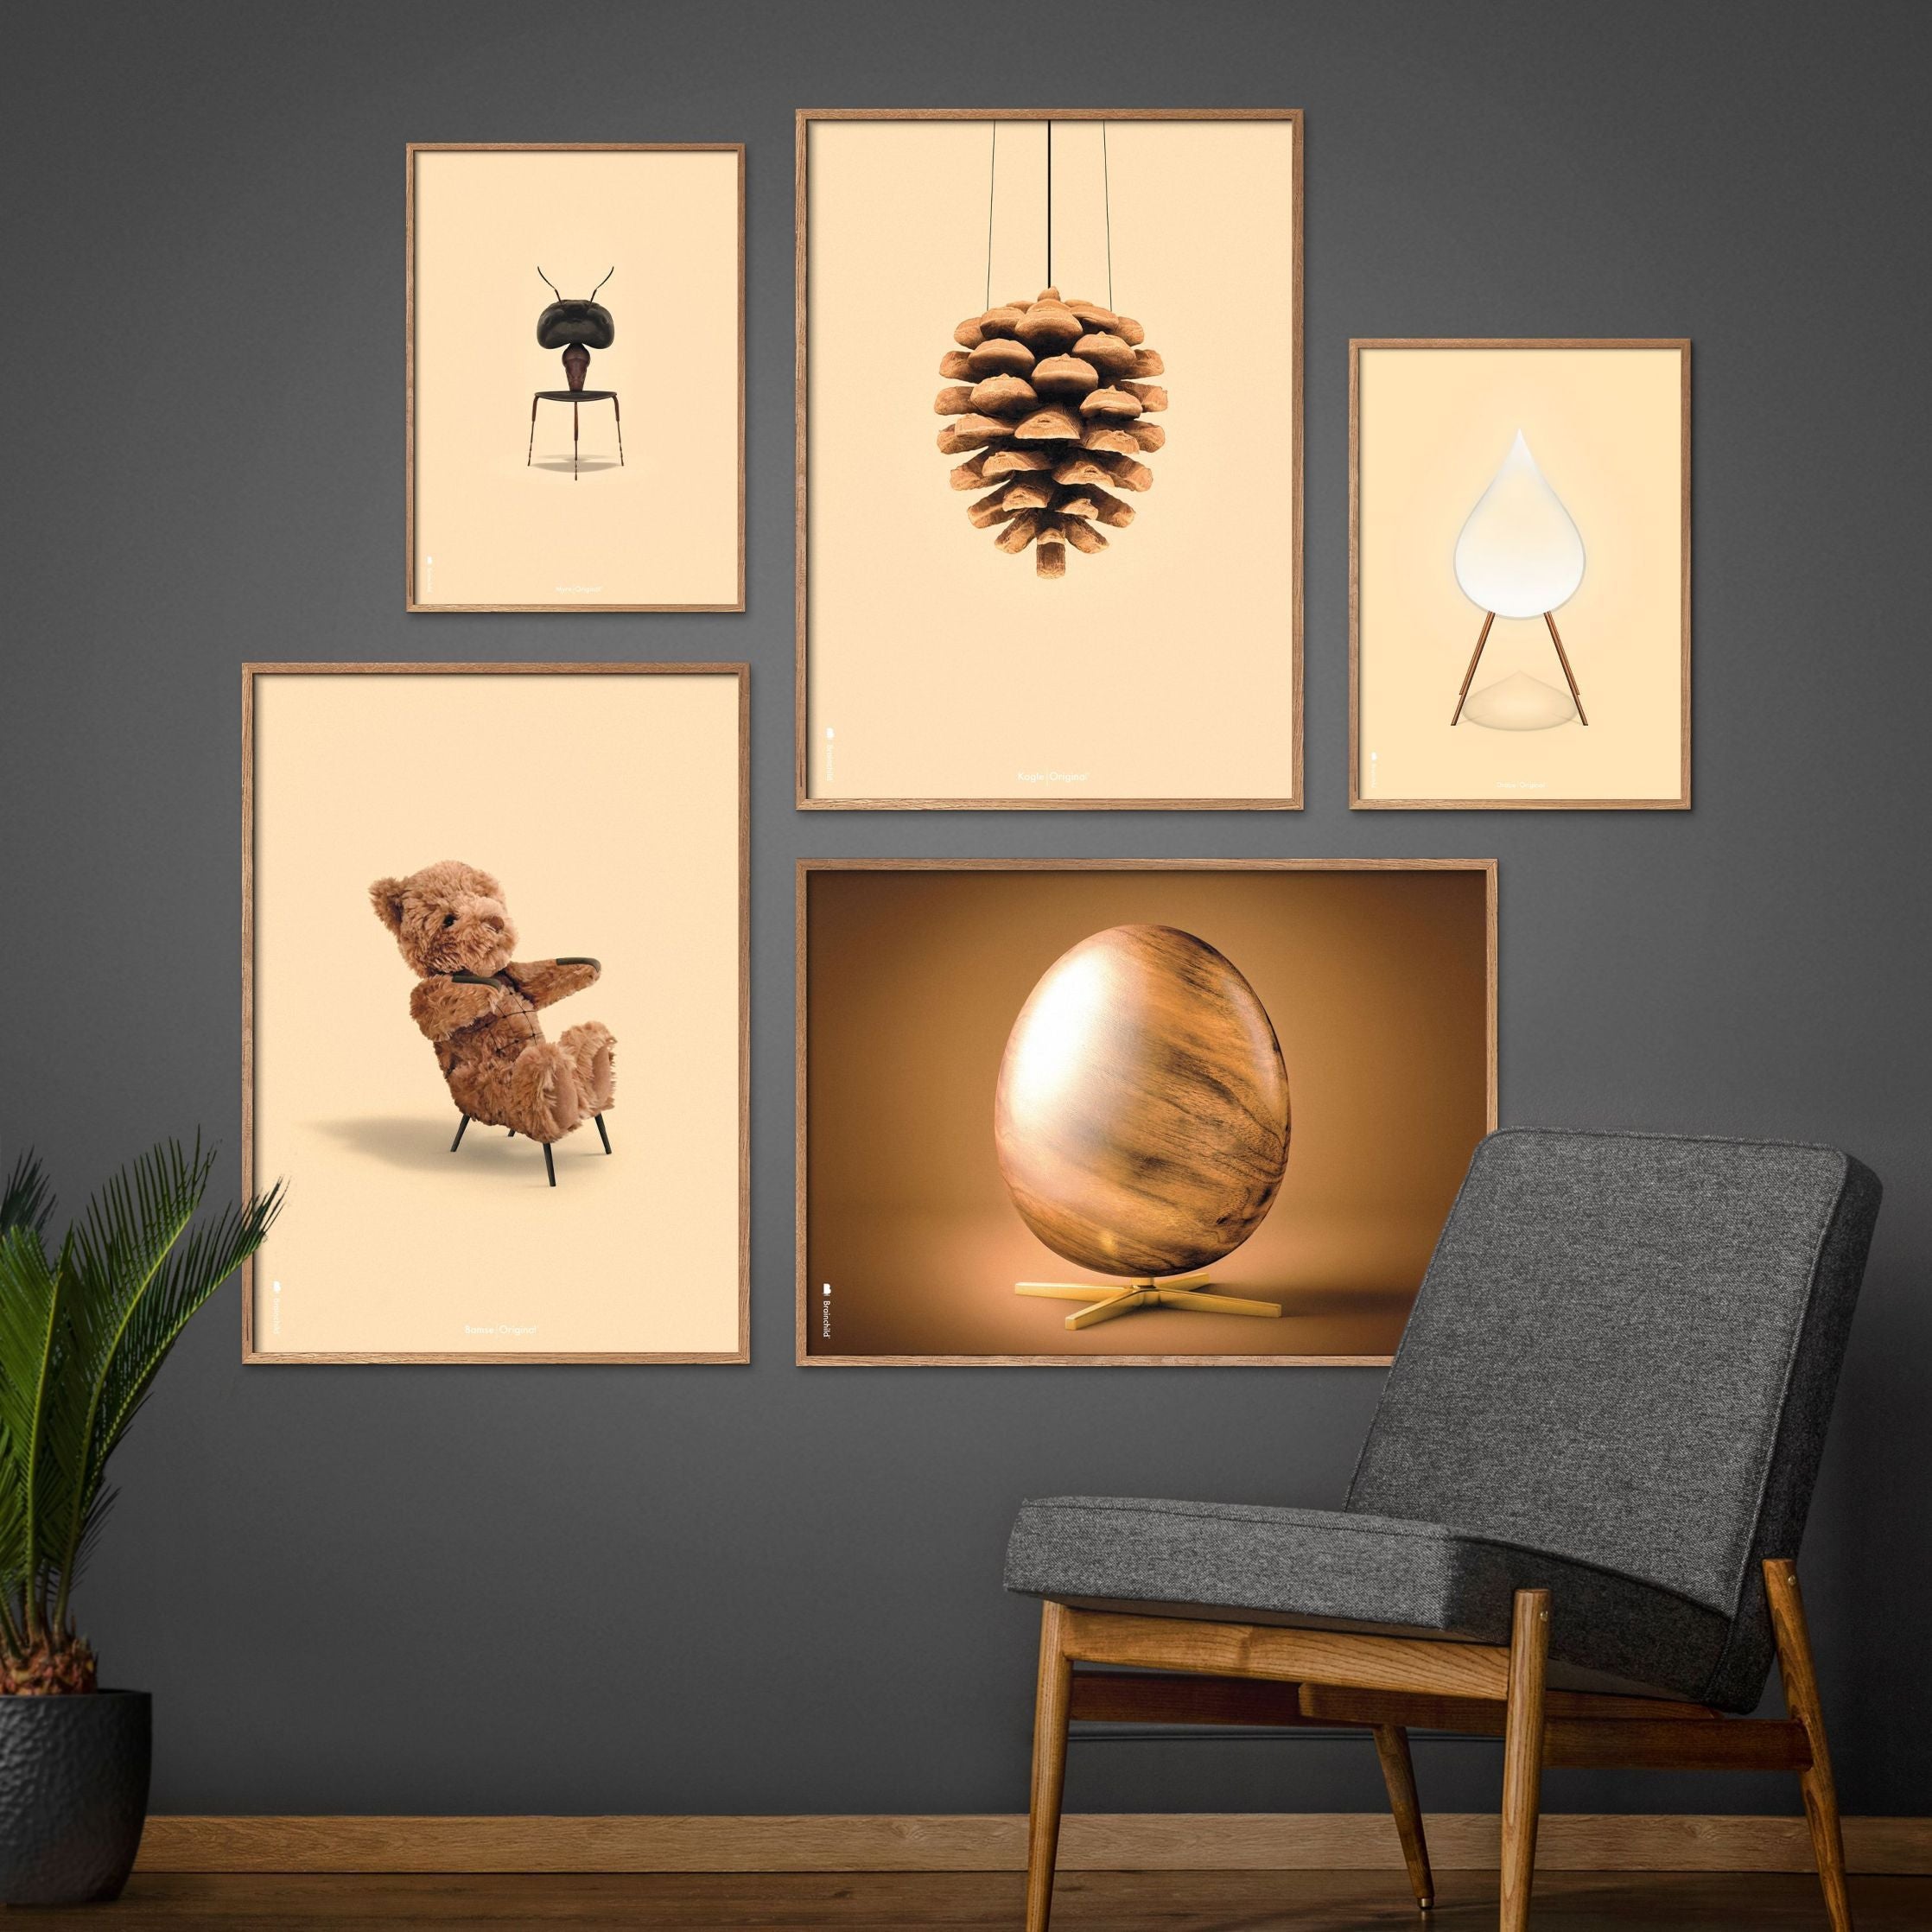 Brainchild Drop Classic Poster, Frame Made Of Dark Wood 30x40 Cm, Sand Colored Background